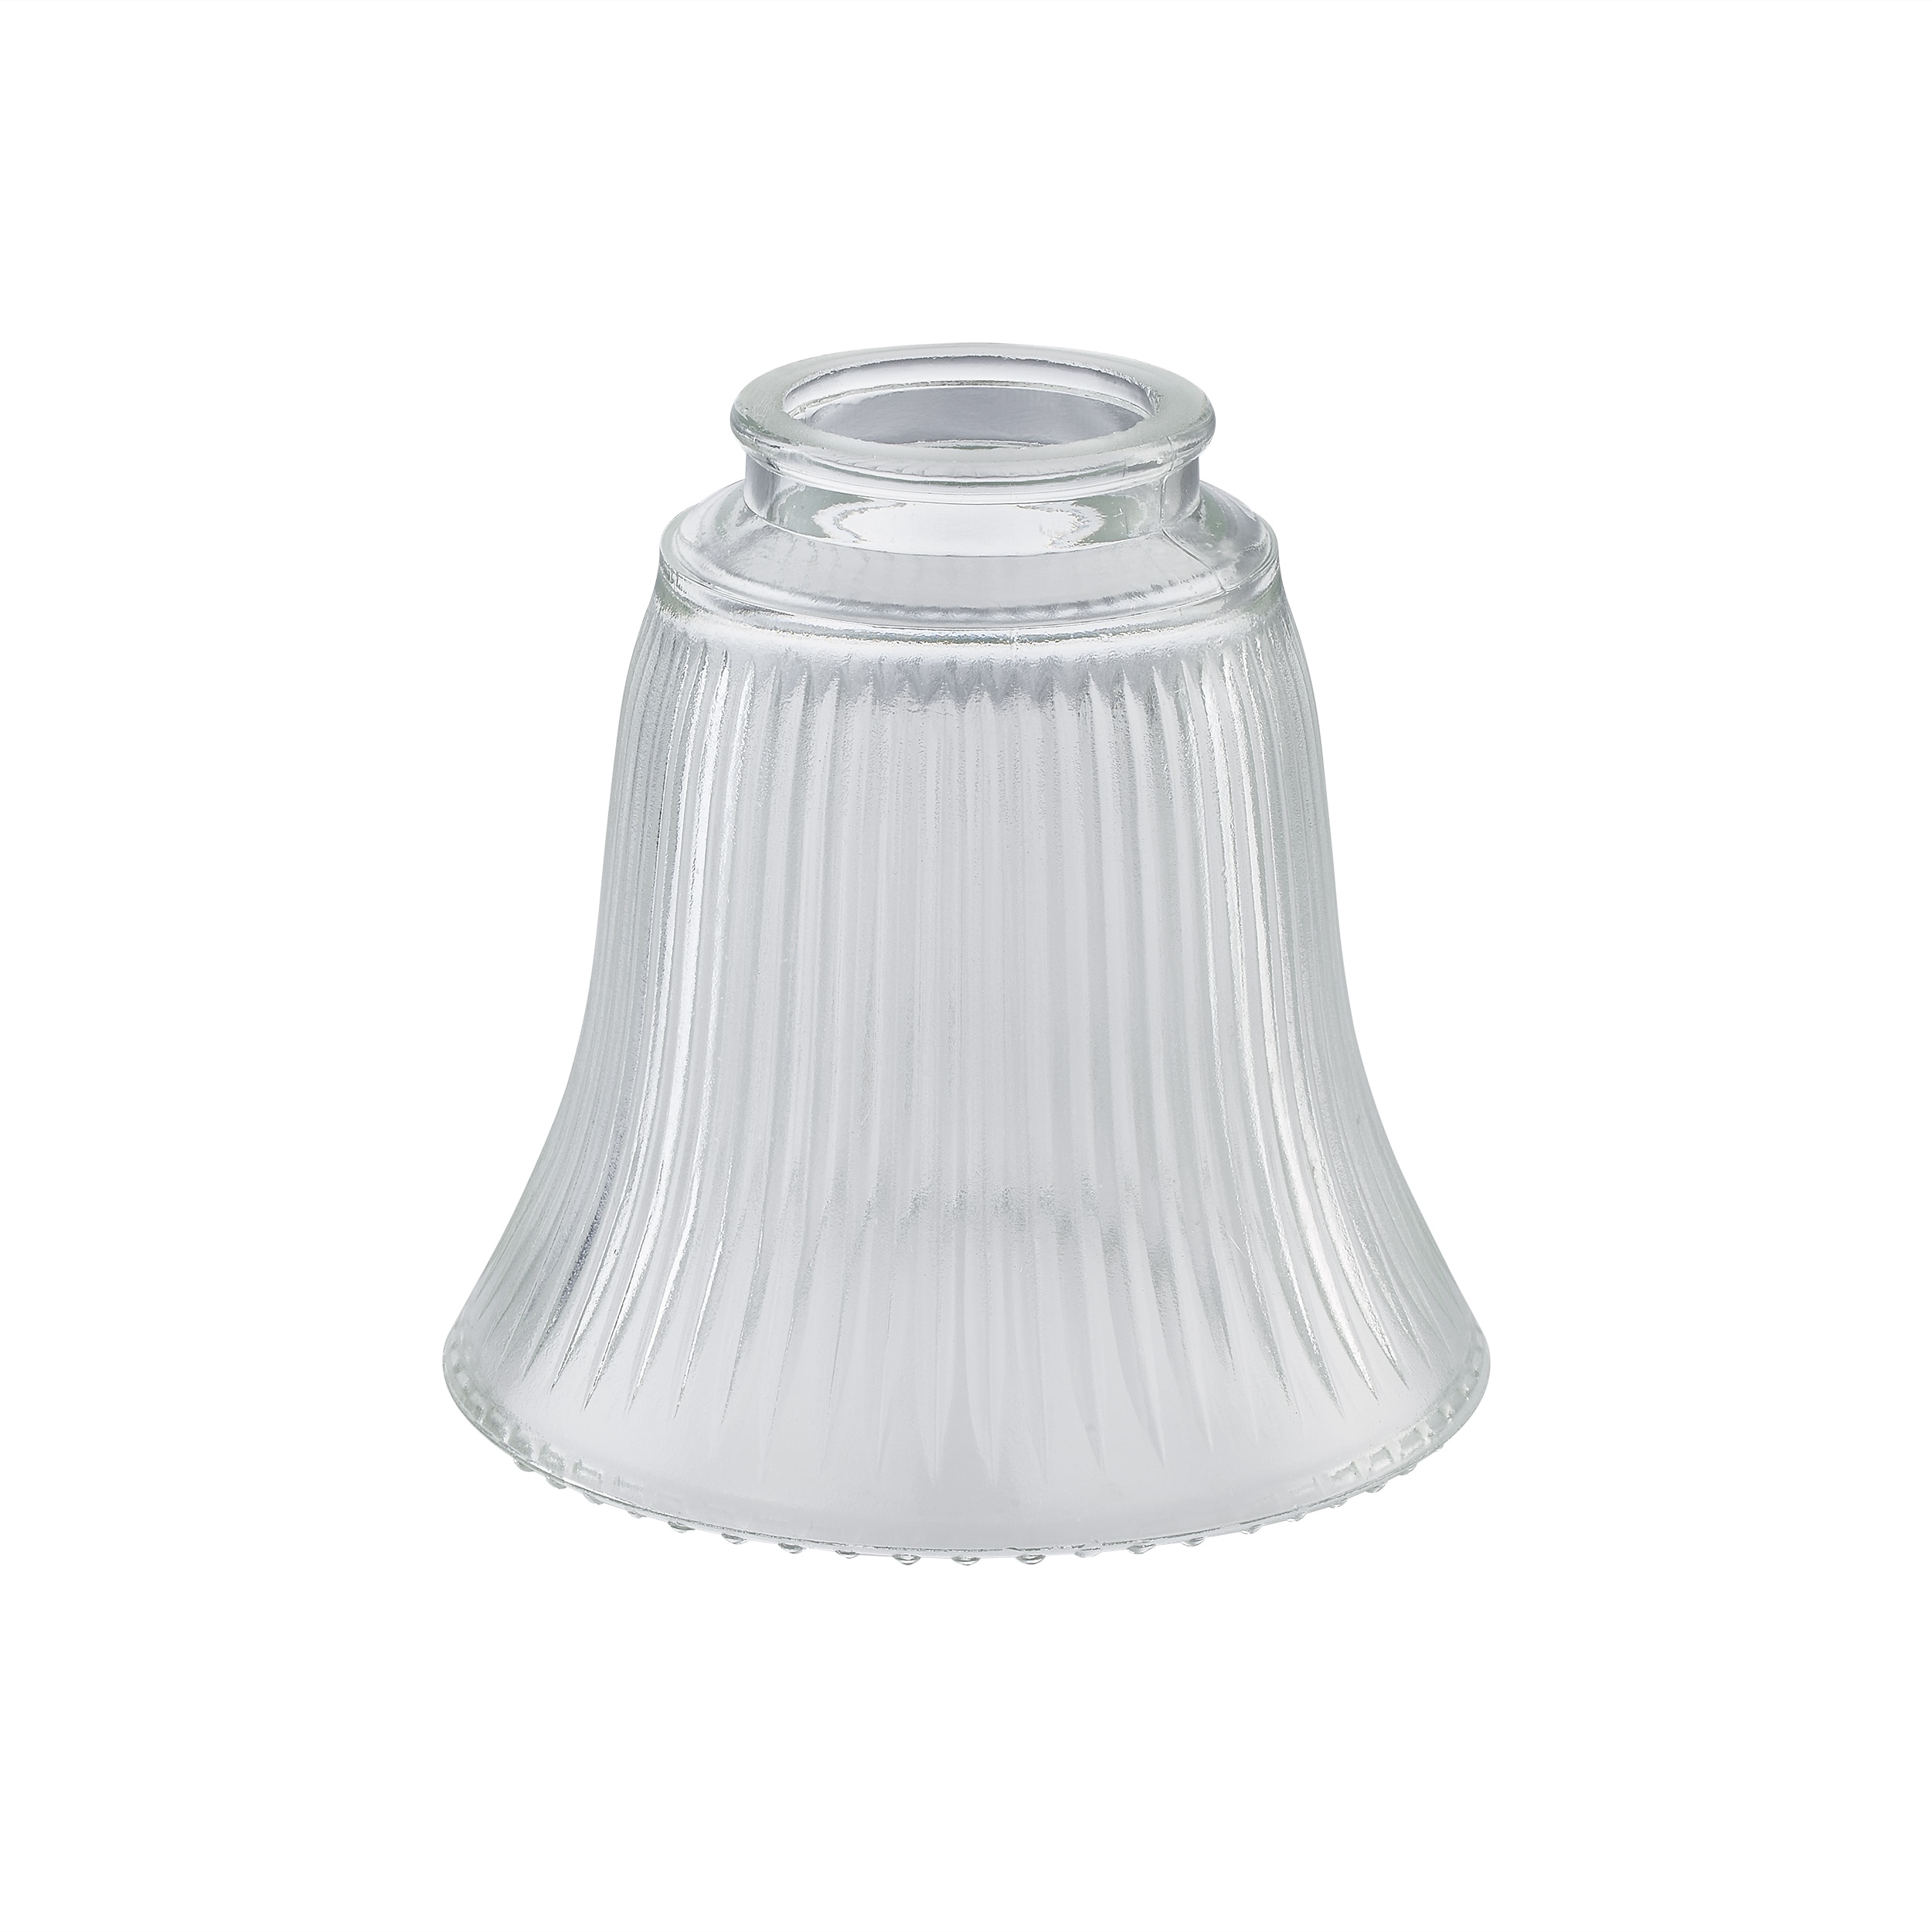 2-1/4-Inch Crystal Clear Pleated Glass Shade 